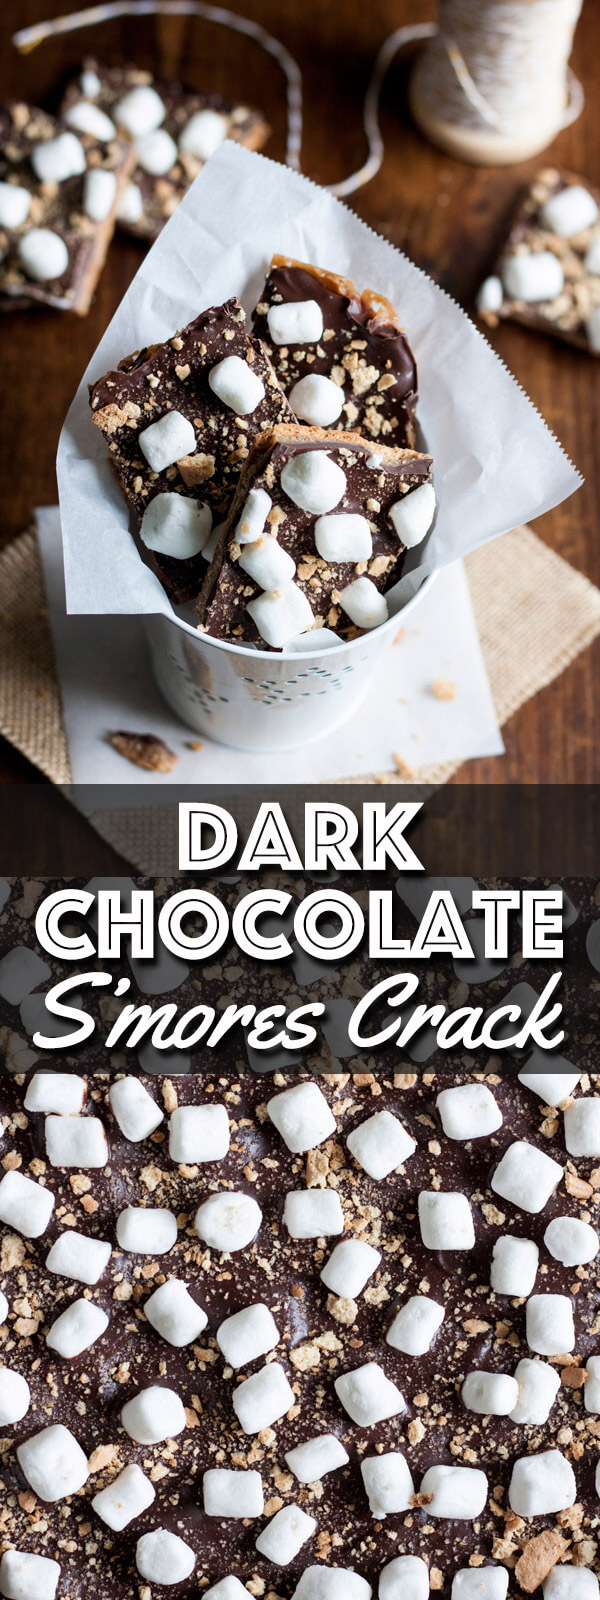 Dark Chocolate S’mores Crack is an easy Graham cracker toffee recipe that you can whip up in just minutes. Enjoy this version of S'mores without having to light a camp fire! #SundaySupper | wildwildwhisk.com